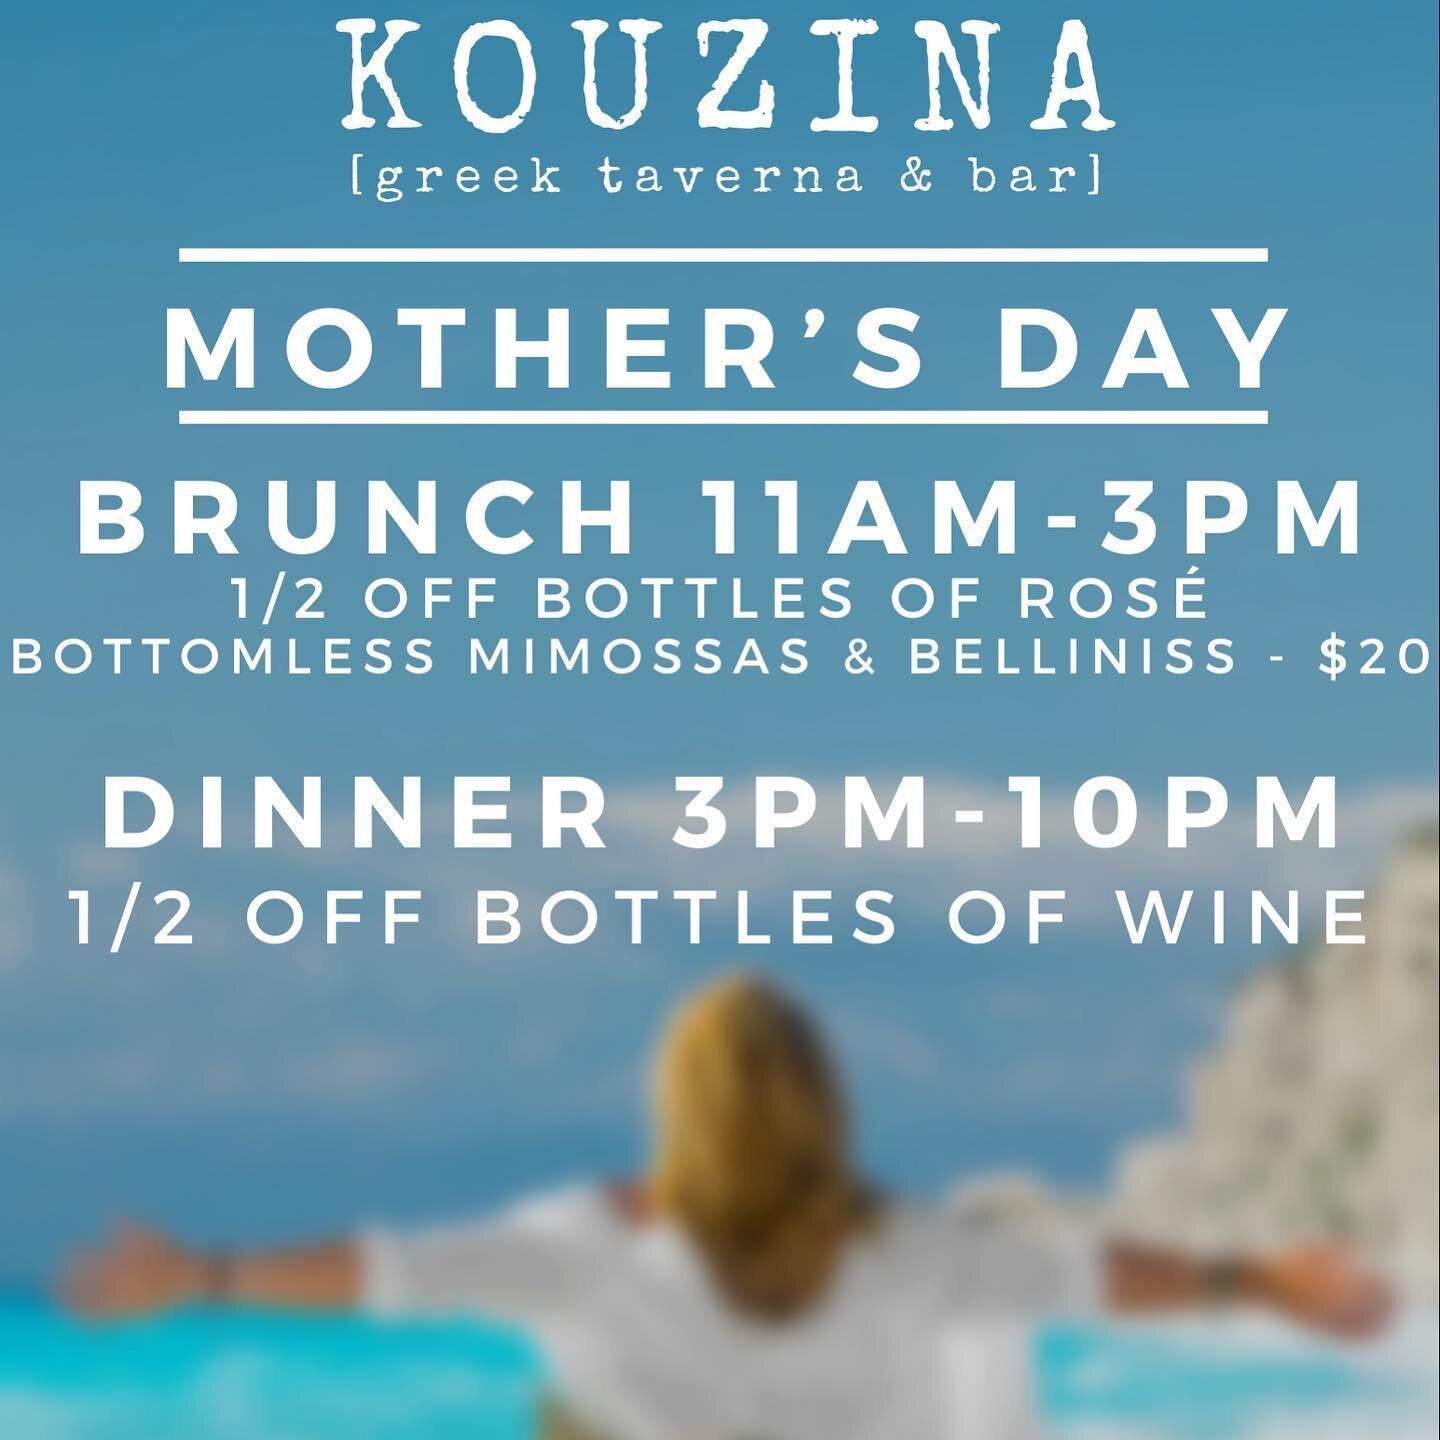 Sunday, May 9th is Mother&rsquo;s Day! Now accepting reservations for parties of 6 or more. #mothersday